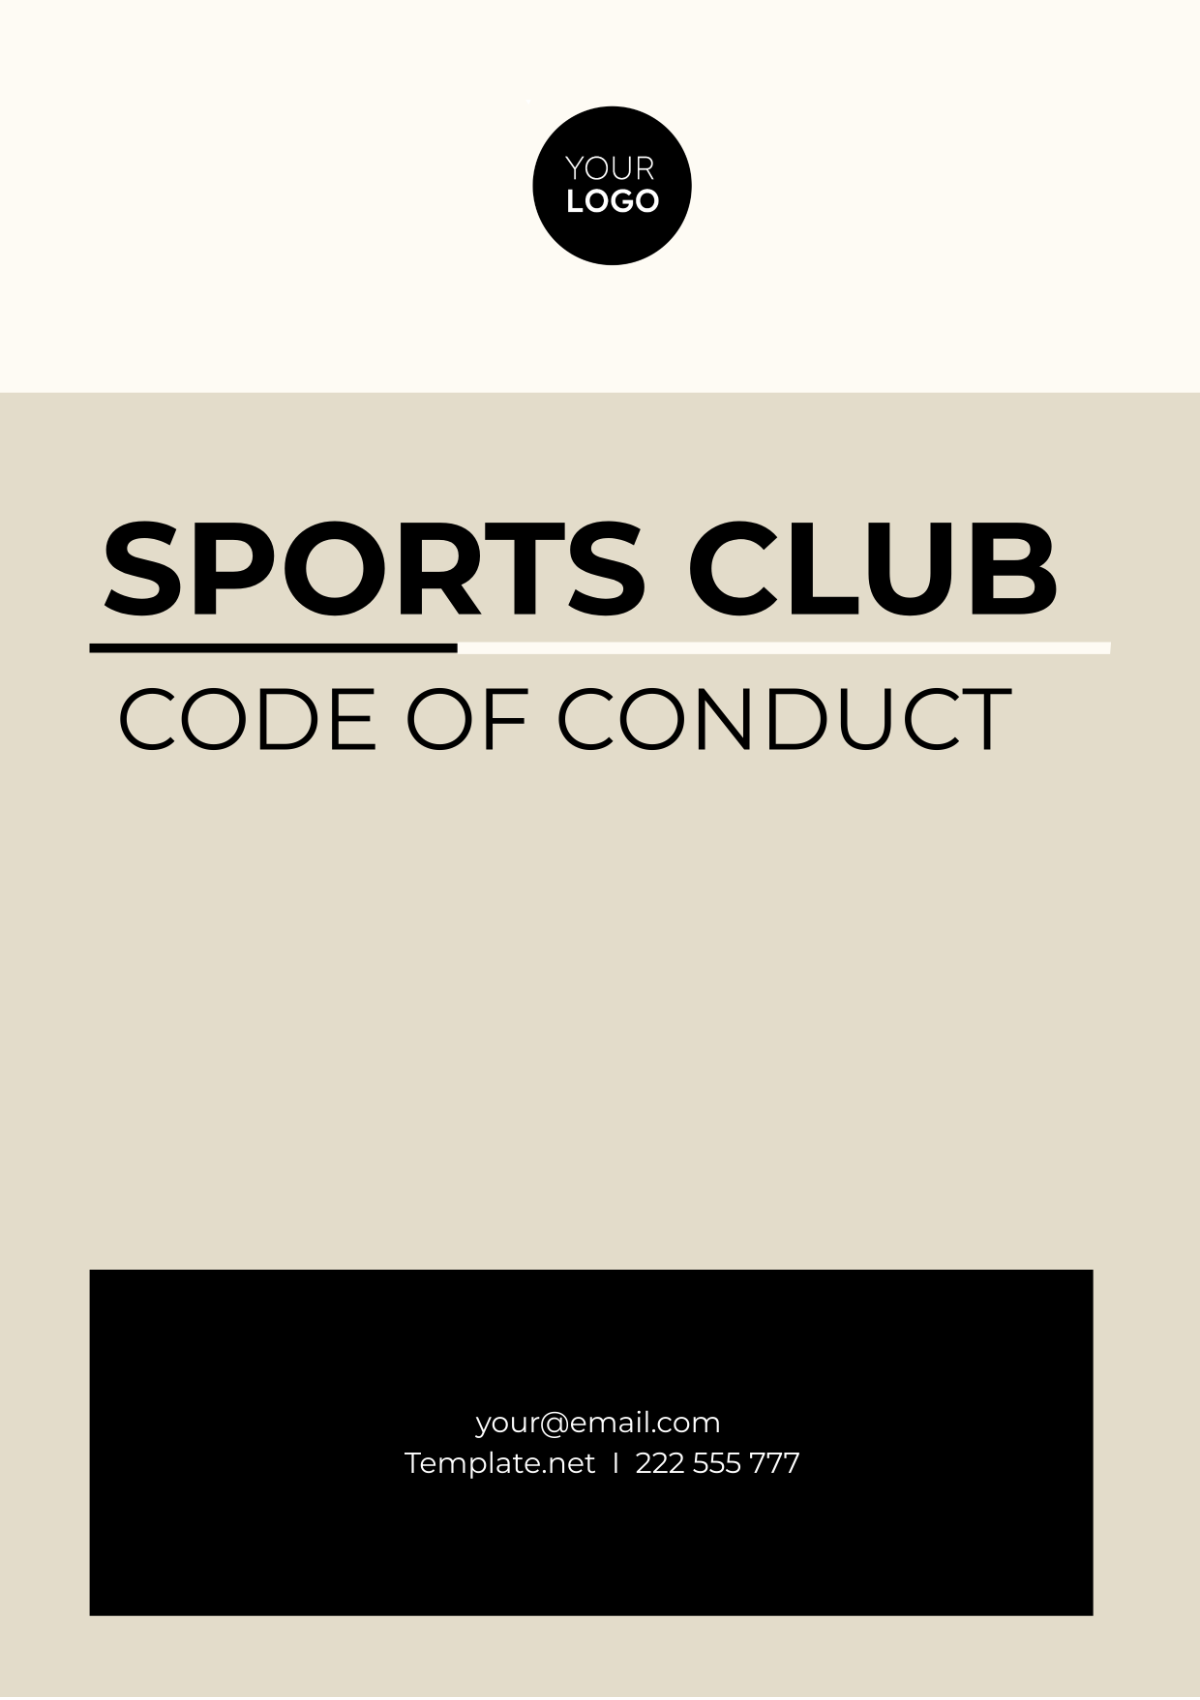 Sports Club Code of Conduct Template